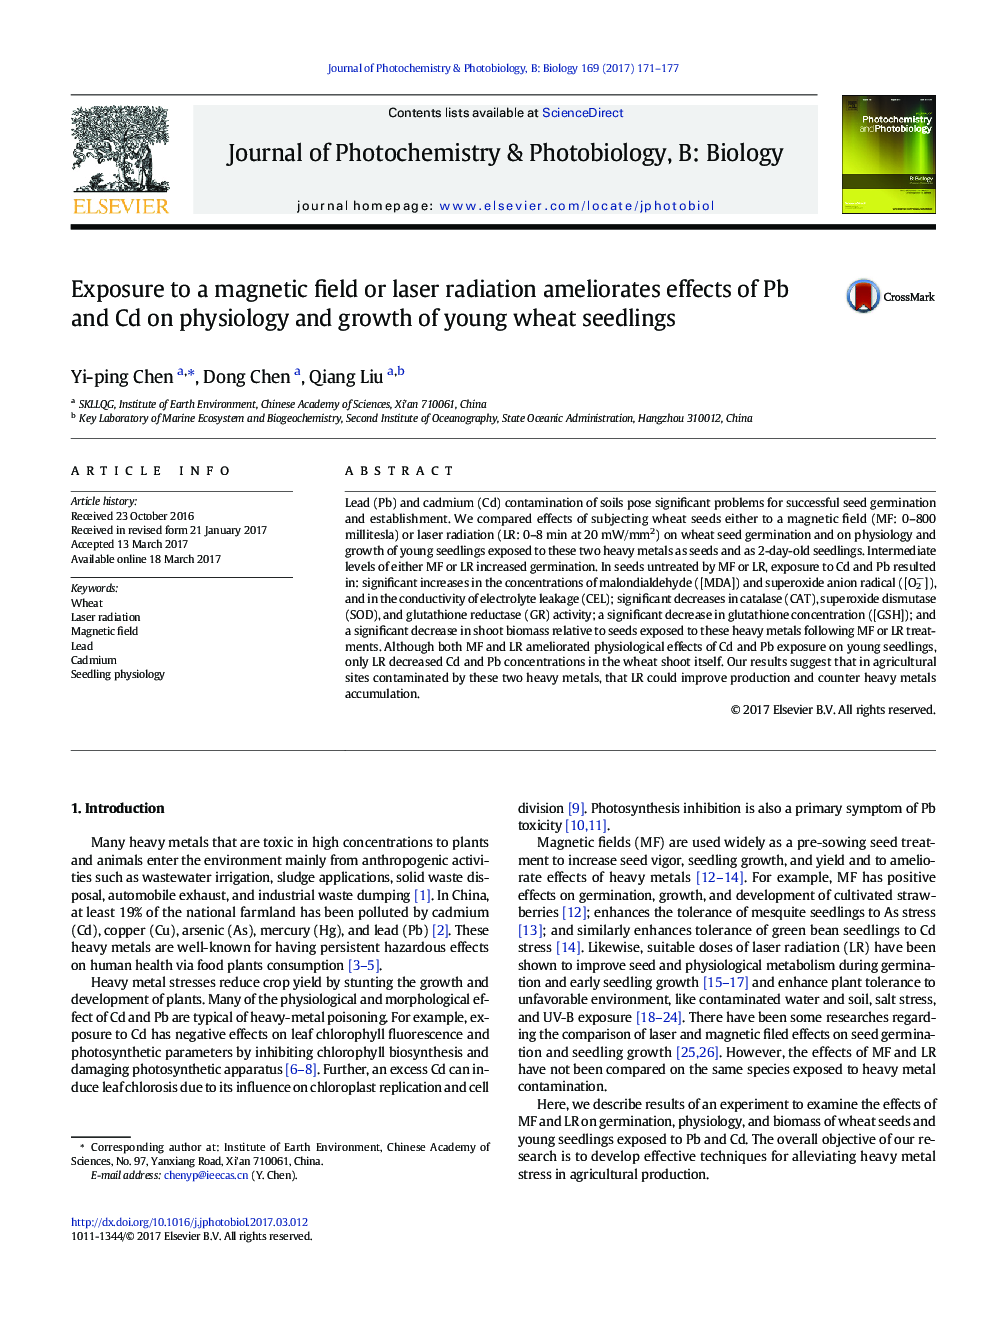 Exposure to a magnetic field or laser radiation ameliorates effects of Pb and Cd on physiology and growth of young wheat seedlings